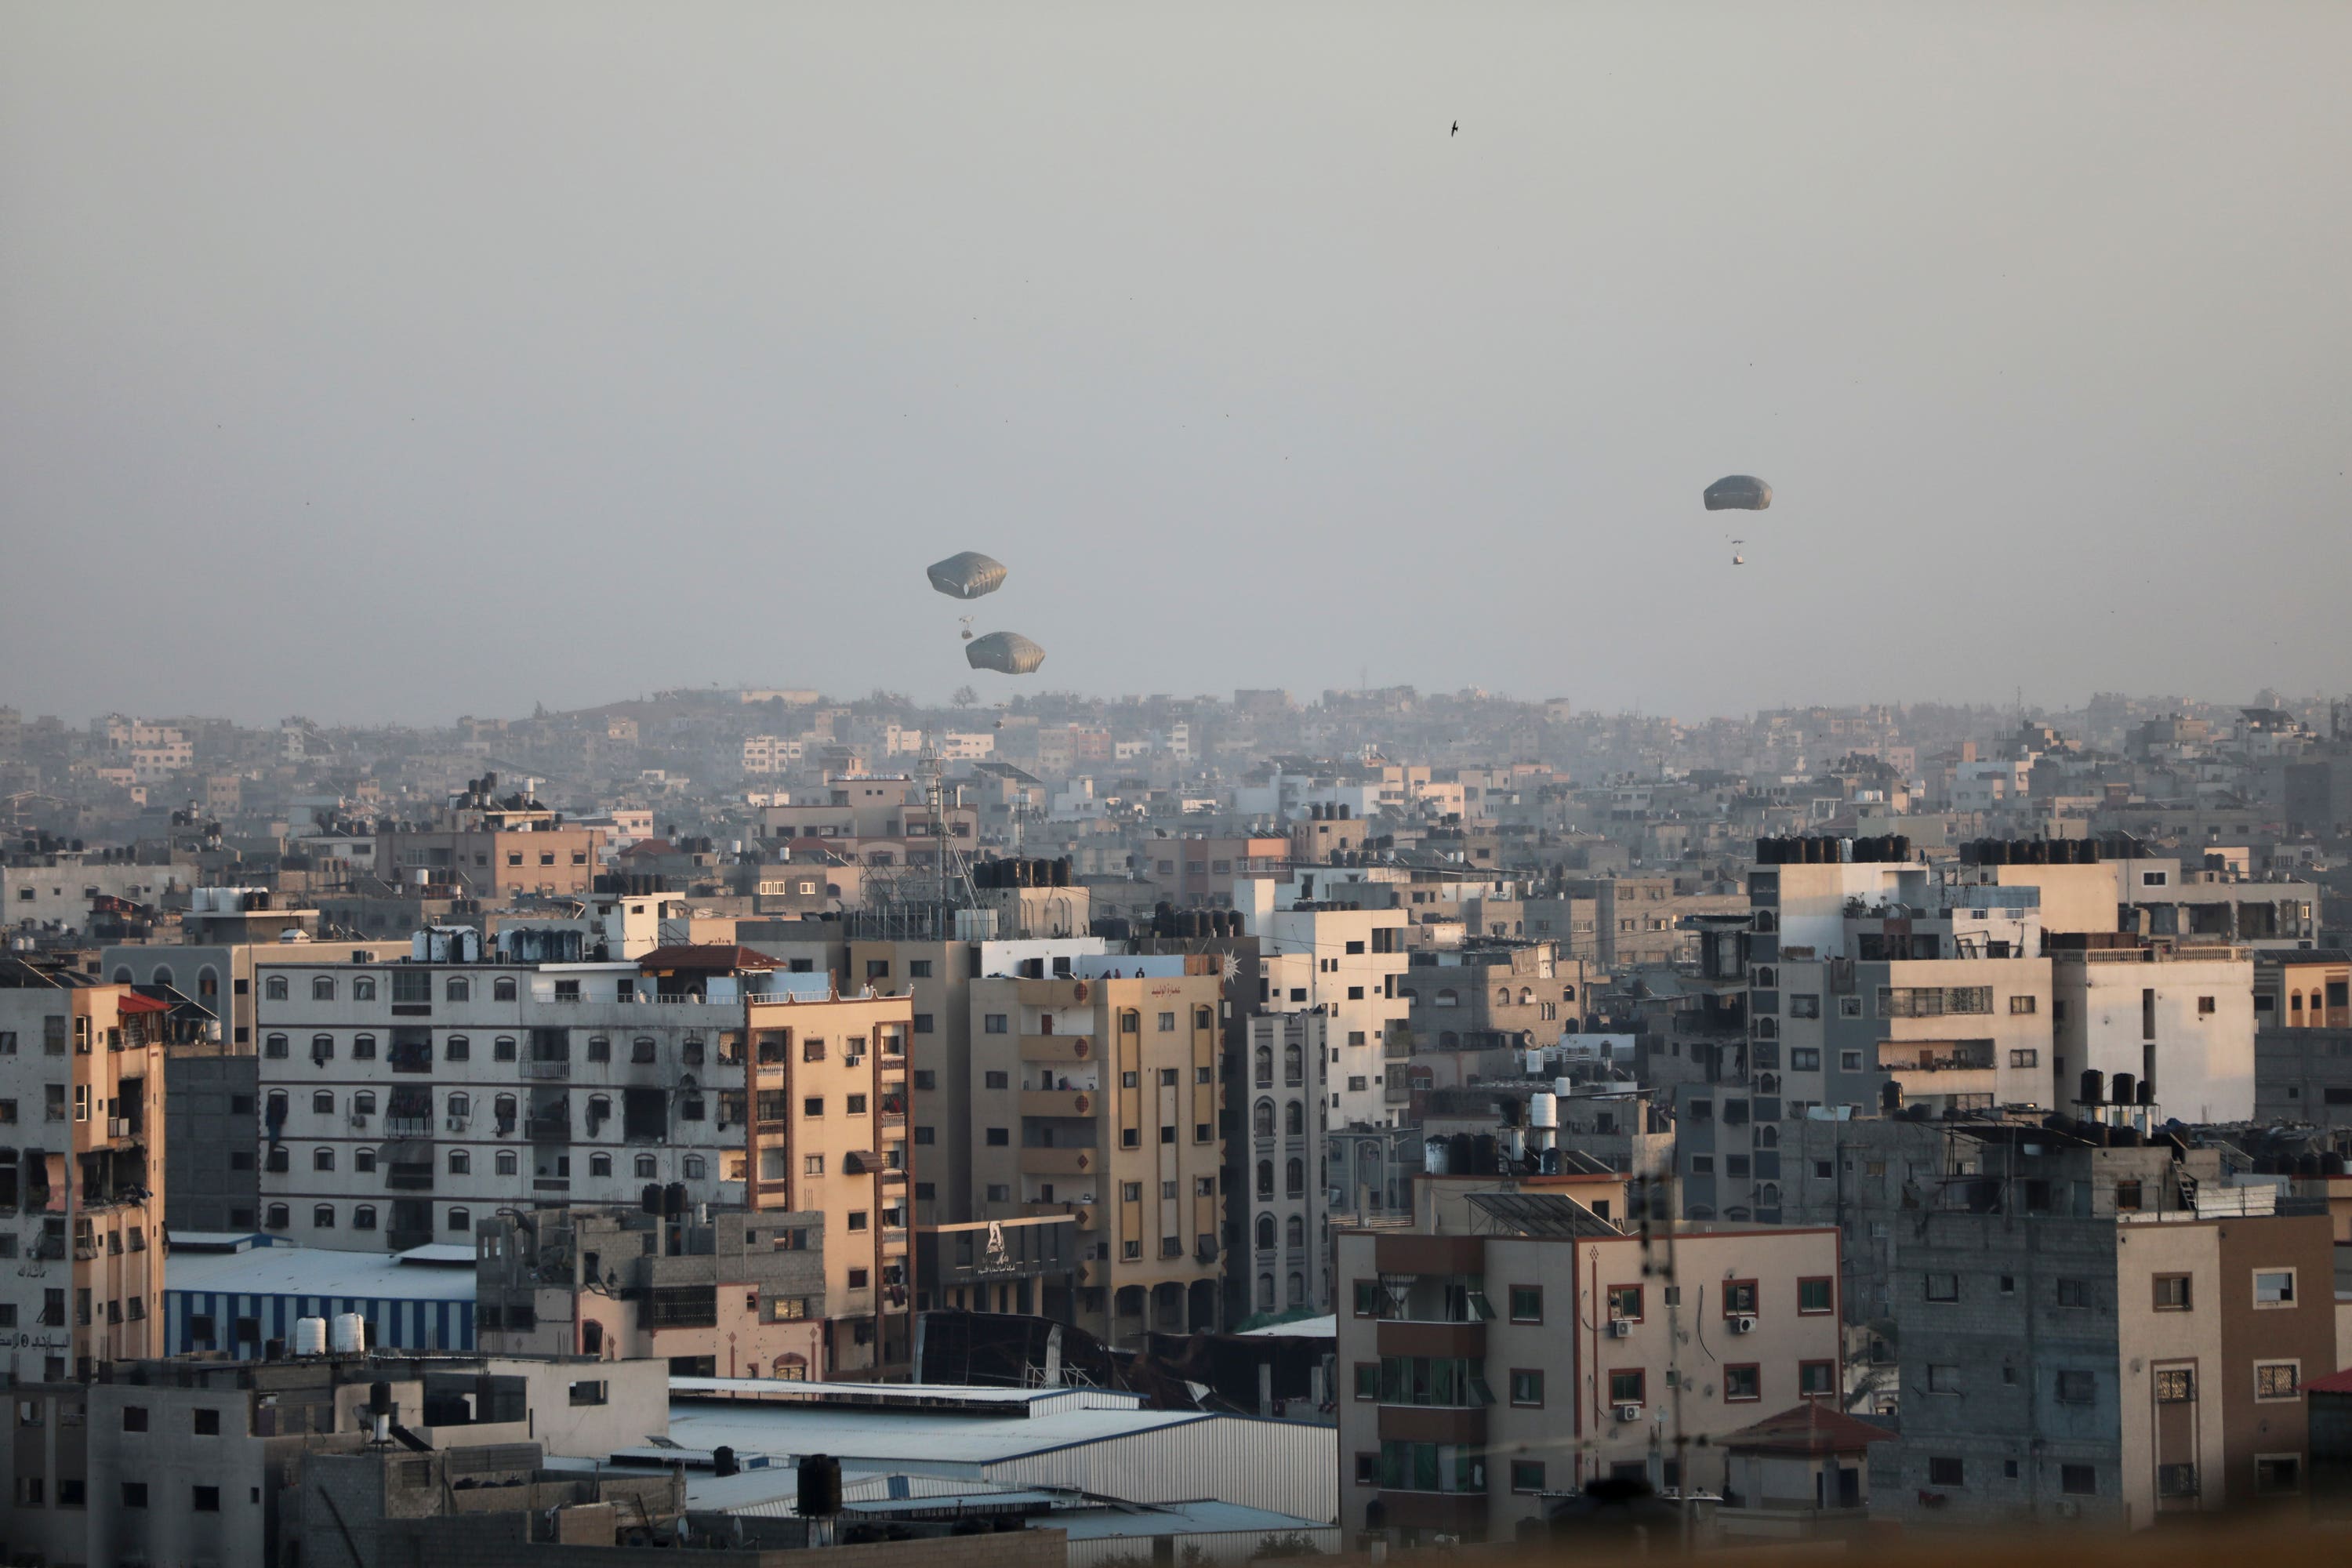 Humanitarian aid was airdropped into Gaza on Saturday.